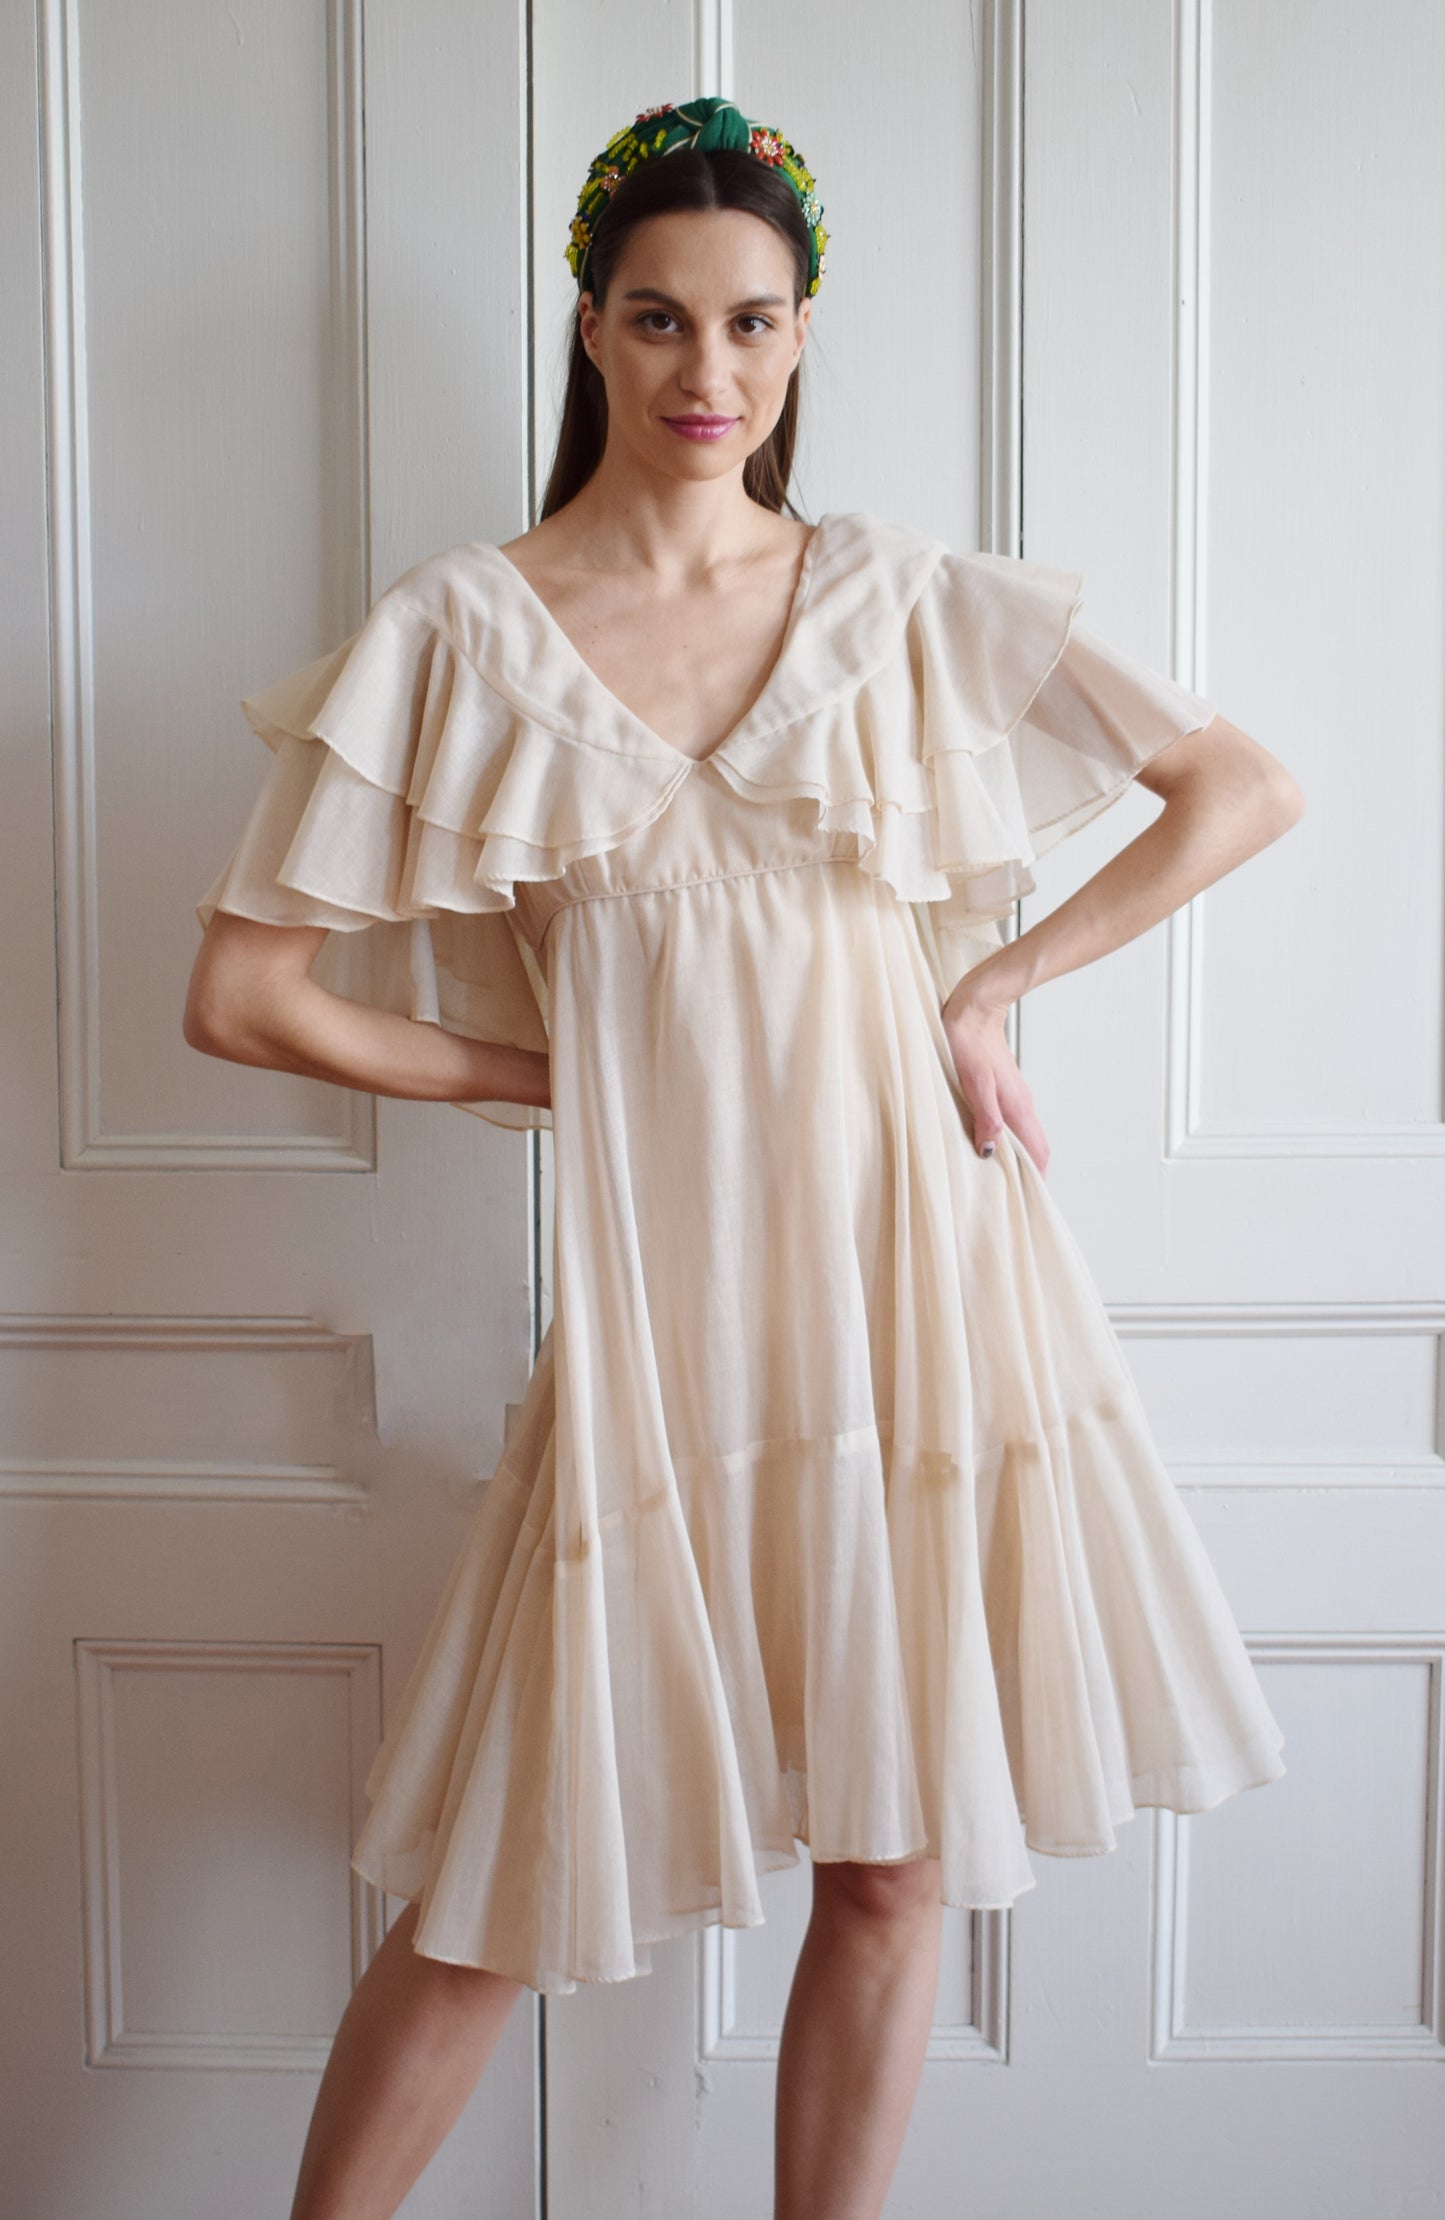 1970s Ruffle Dress by Jay Morley for Fern Violette | S